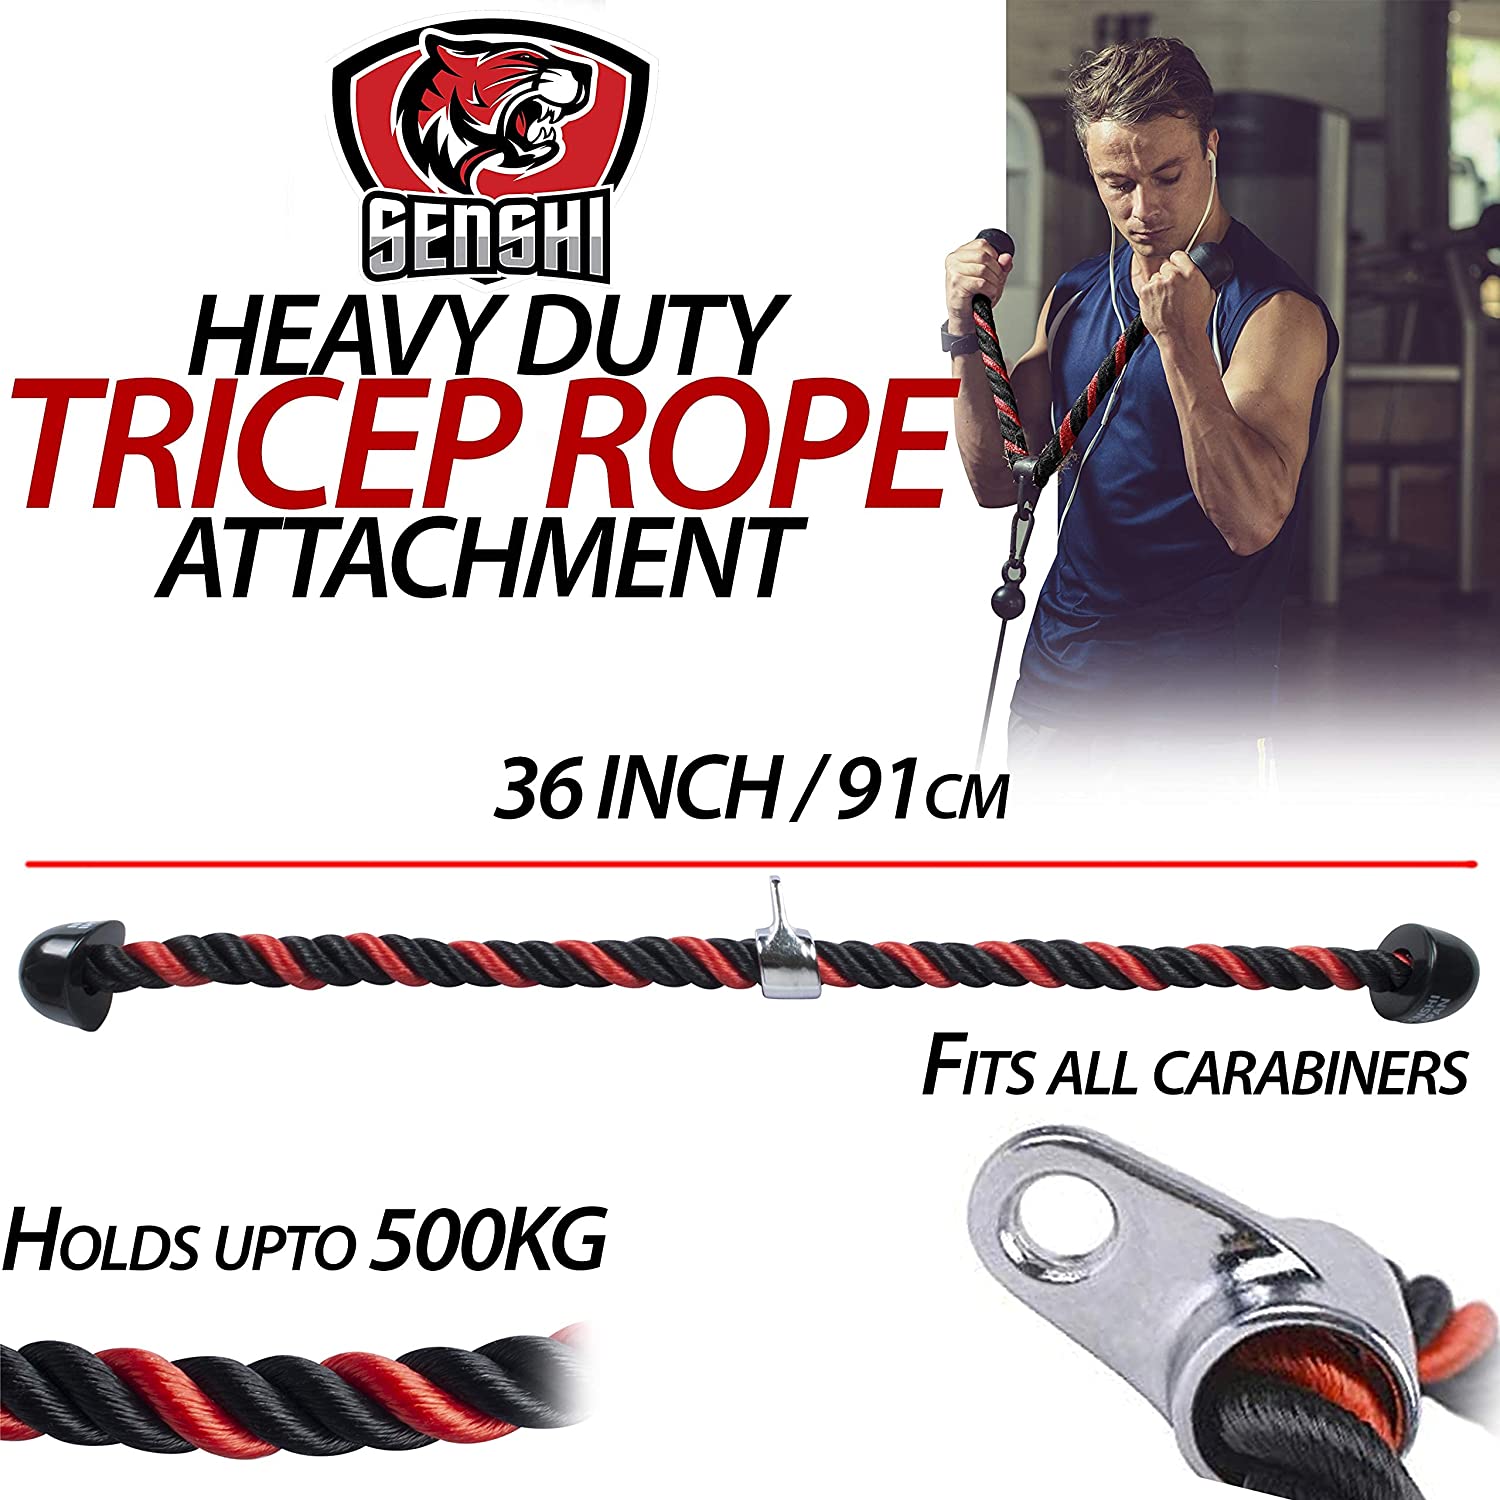 XXL Tricep Rope Cable Machine Attachment - 36 inch For Full Range Of Motion